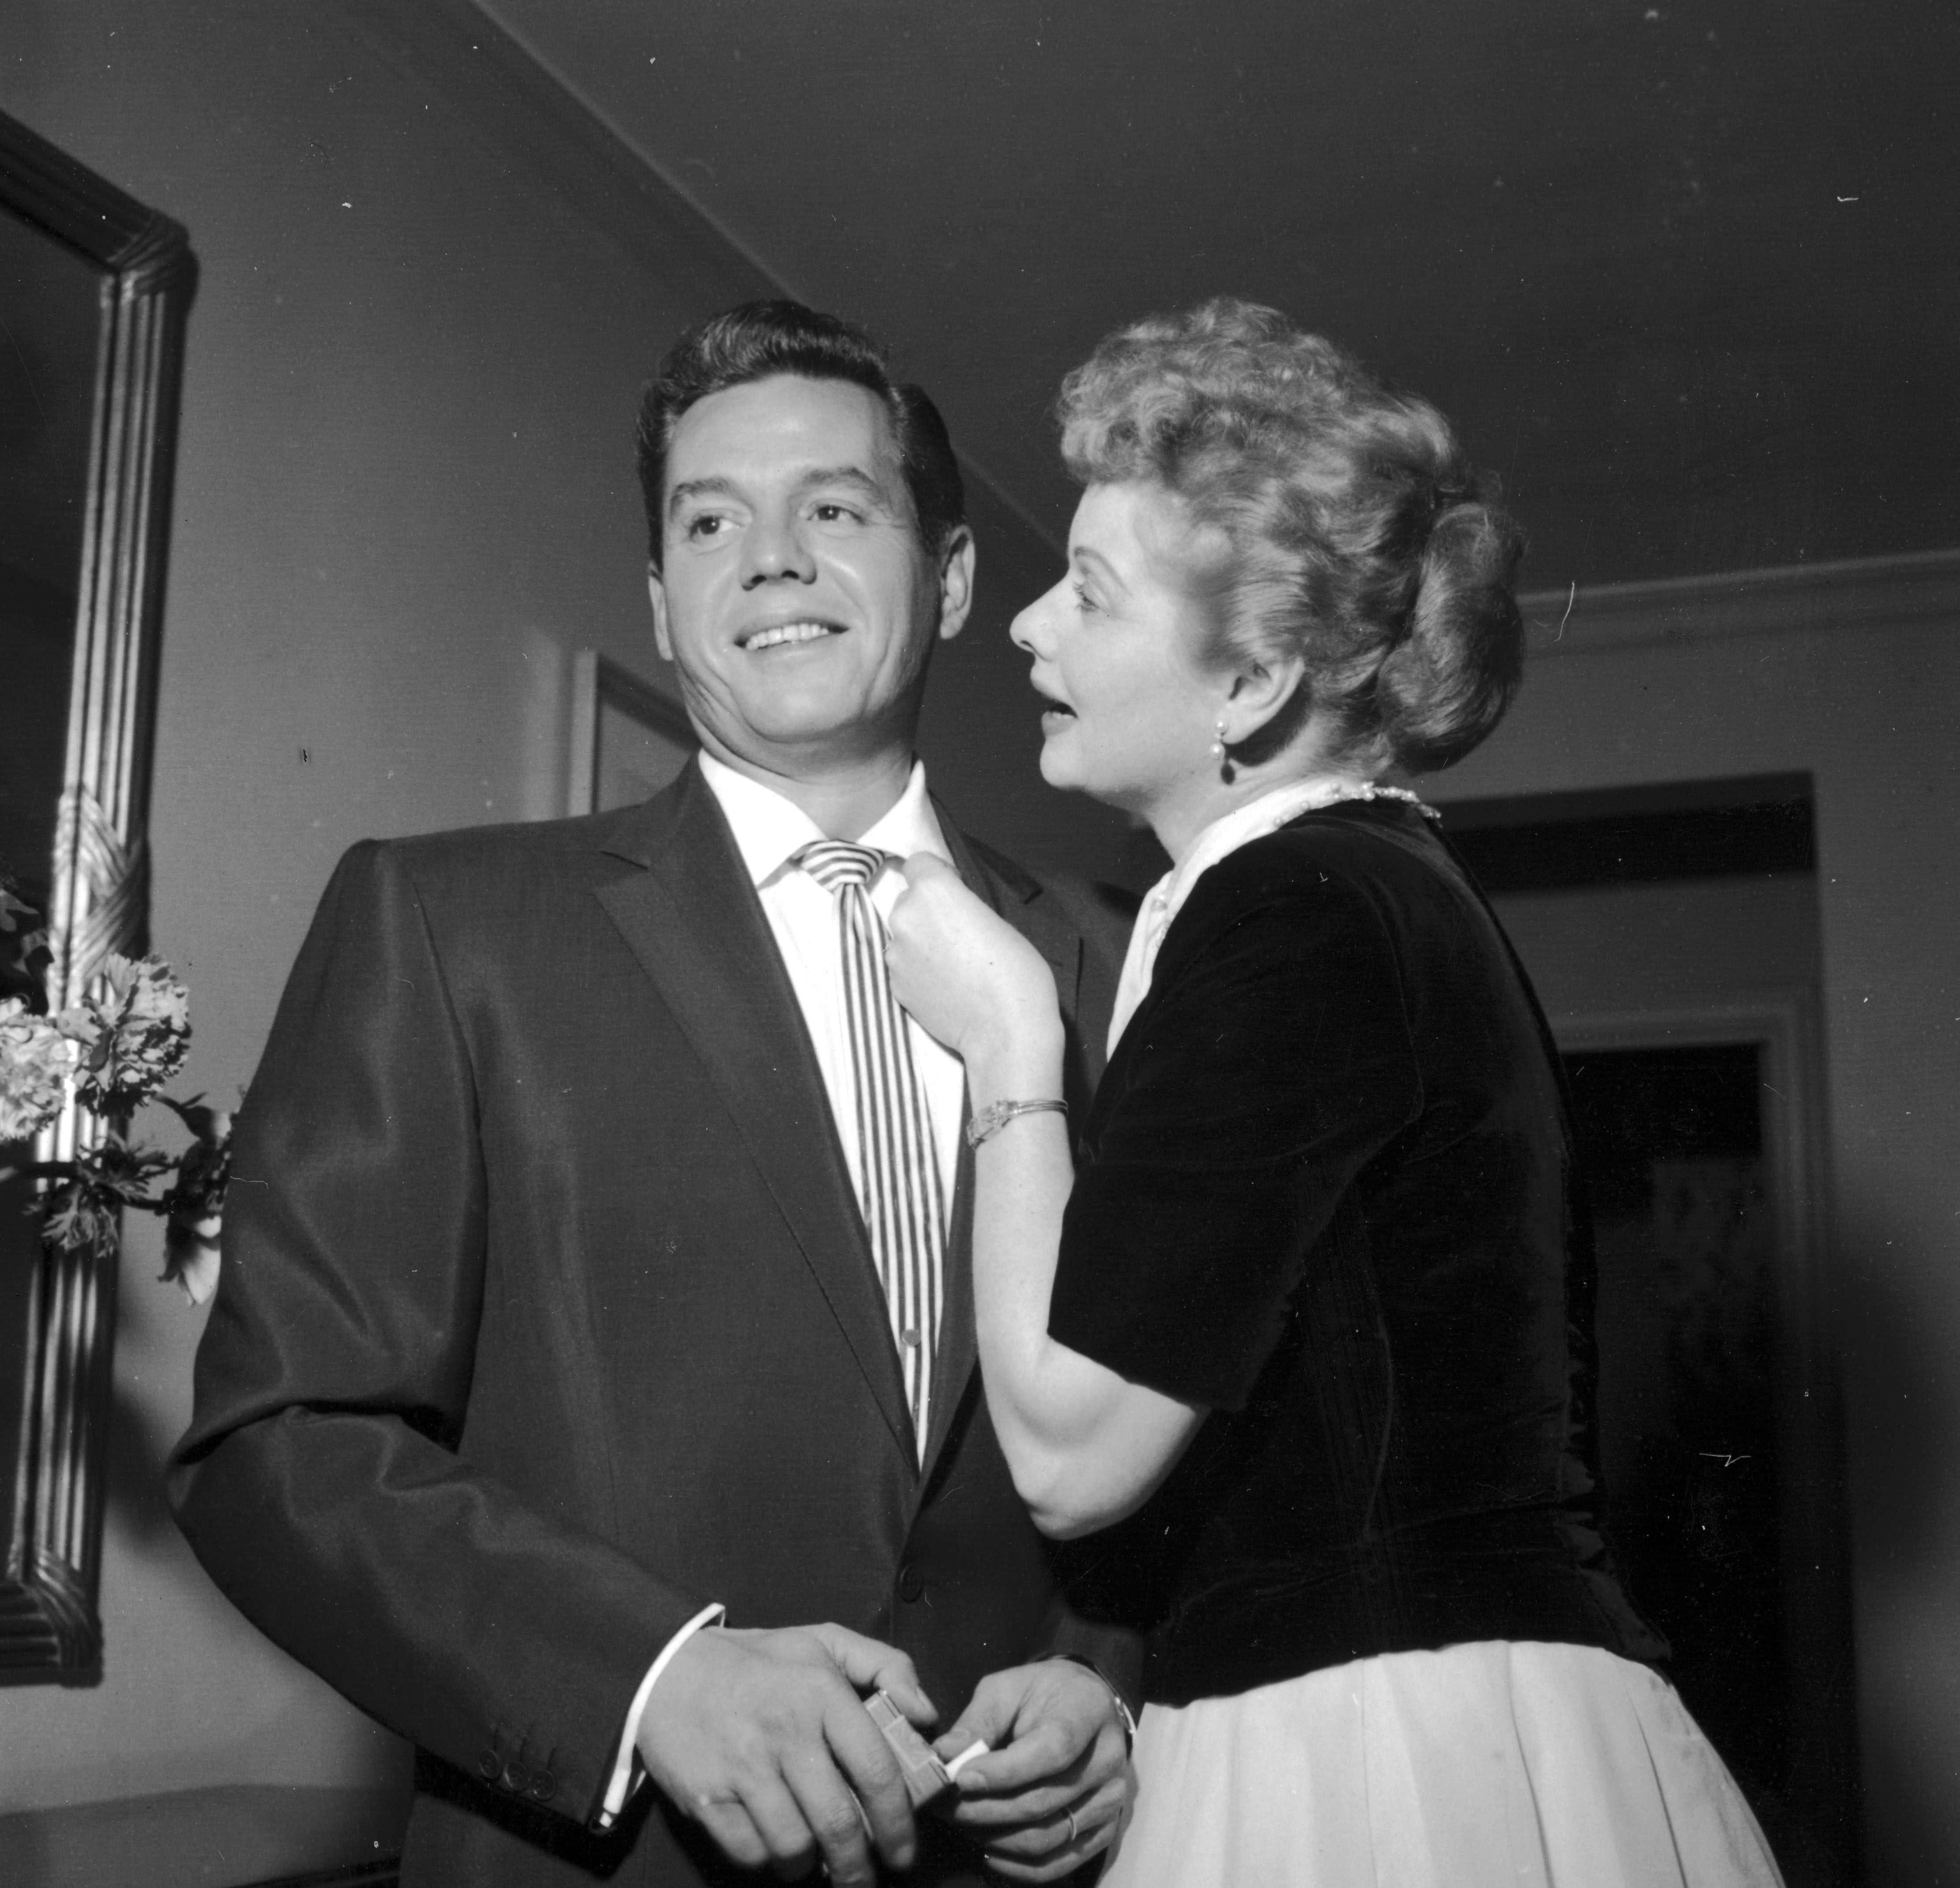 Lucille Ball with her husband Desi Arnaz at the Hotel Carlyle in New York City